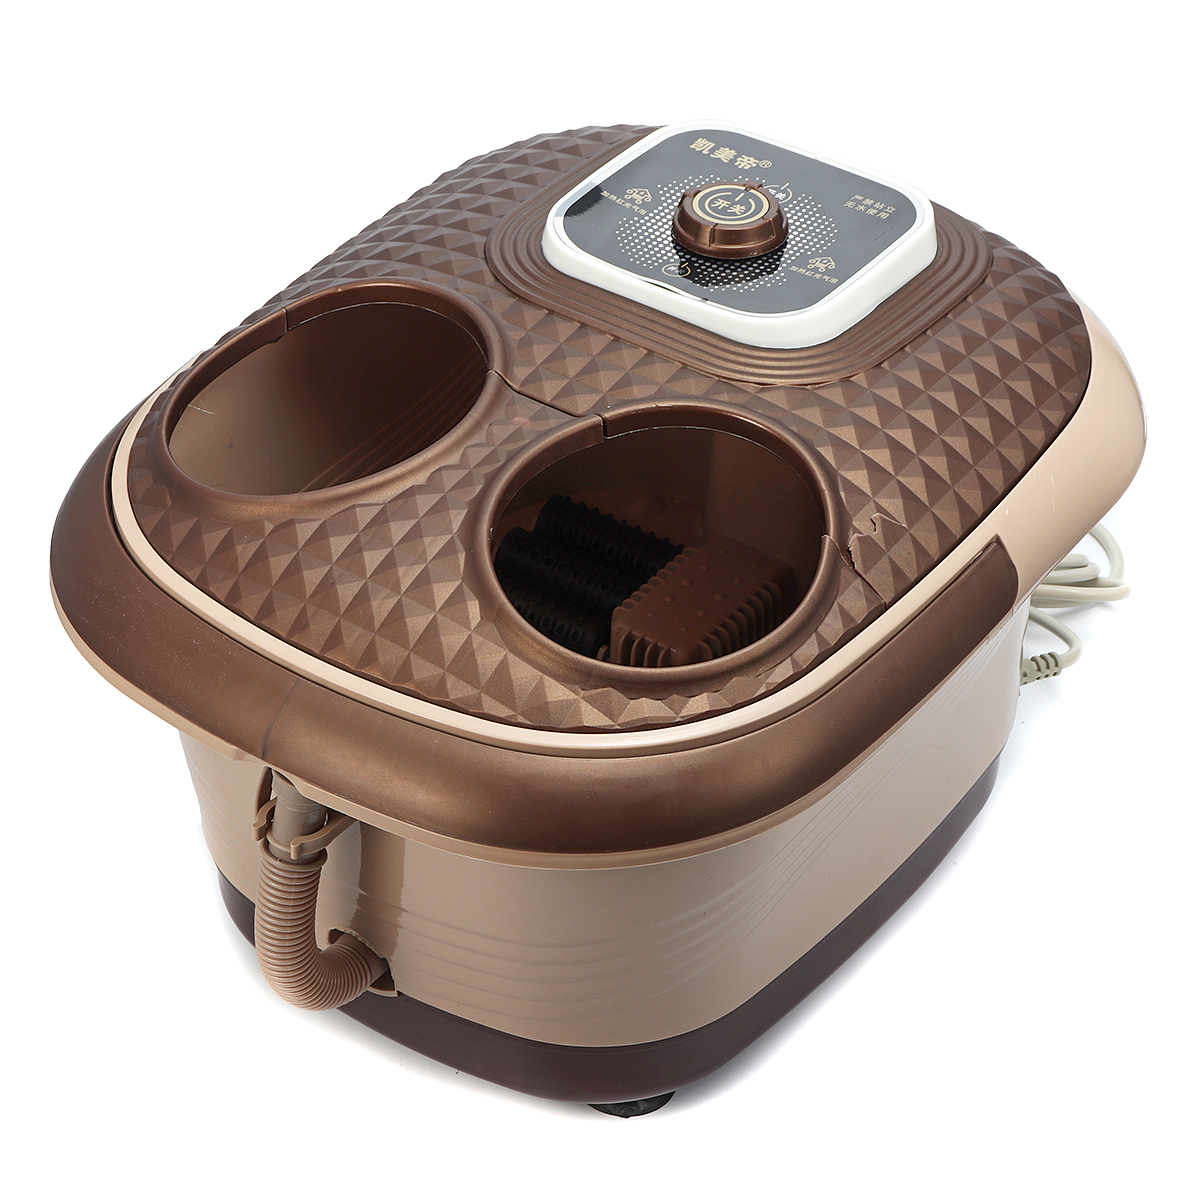 220V-500W-Foot-Spa-Bath-Oxygen-Bubbles-Therapy-Rolling-Vibration-Heat-Electric-Massager-1429605